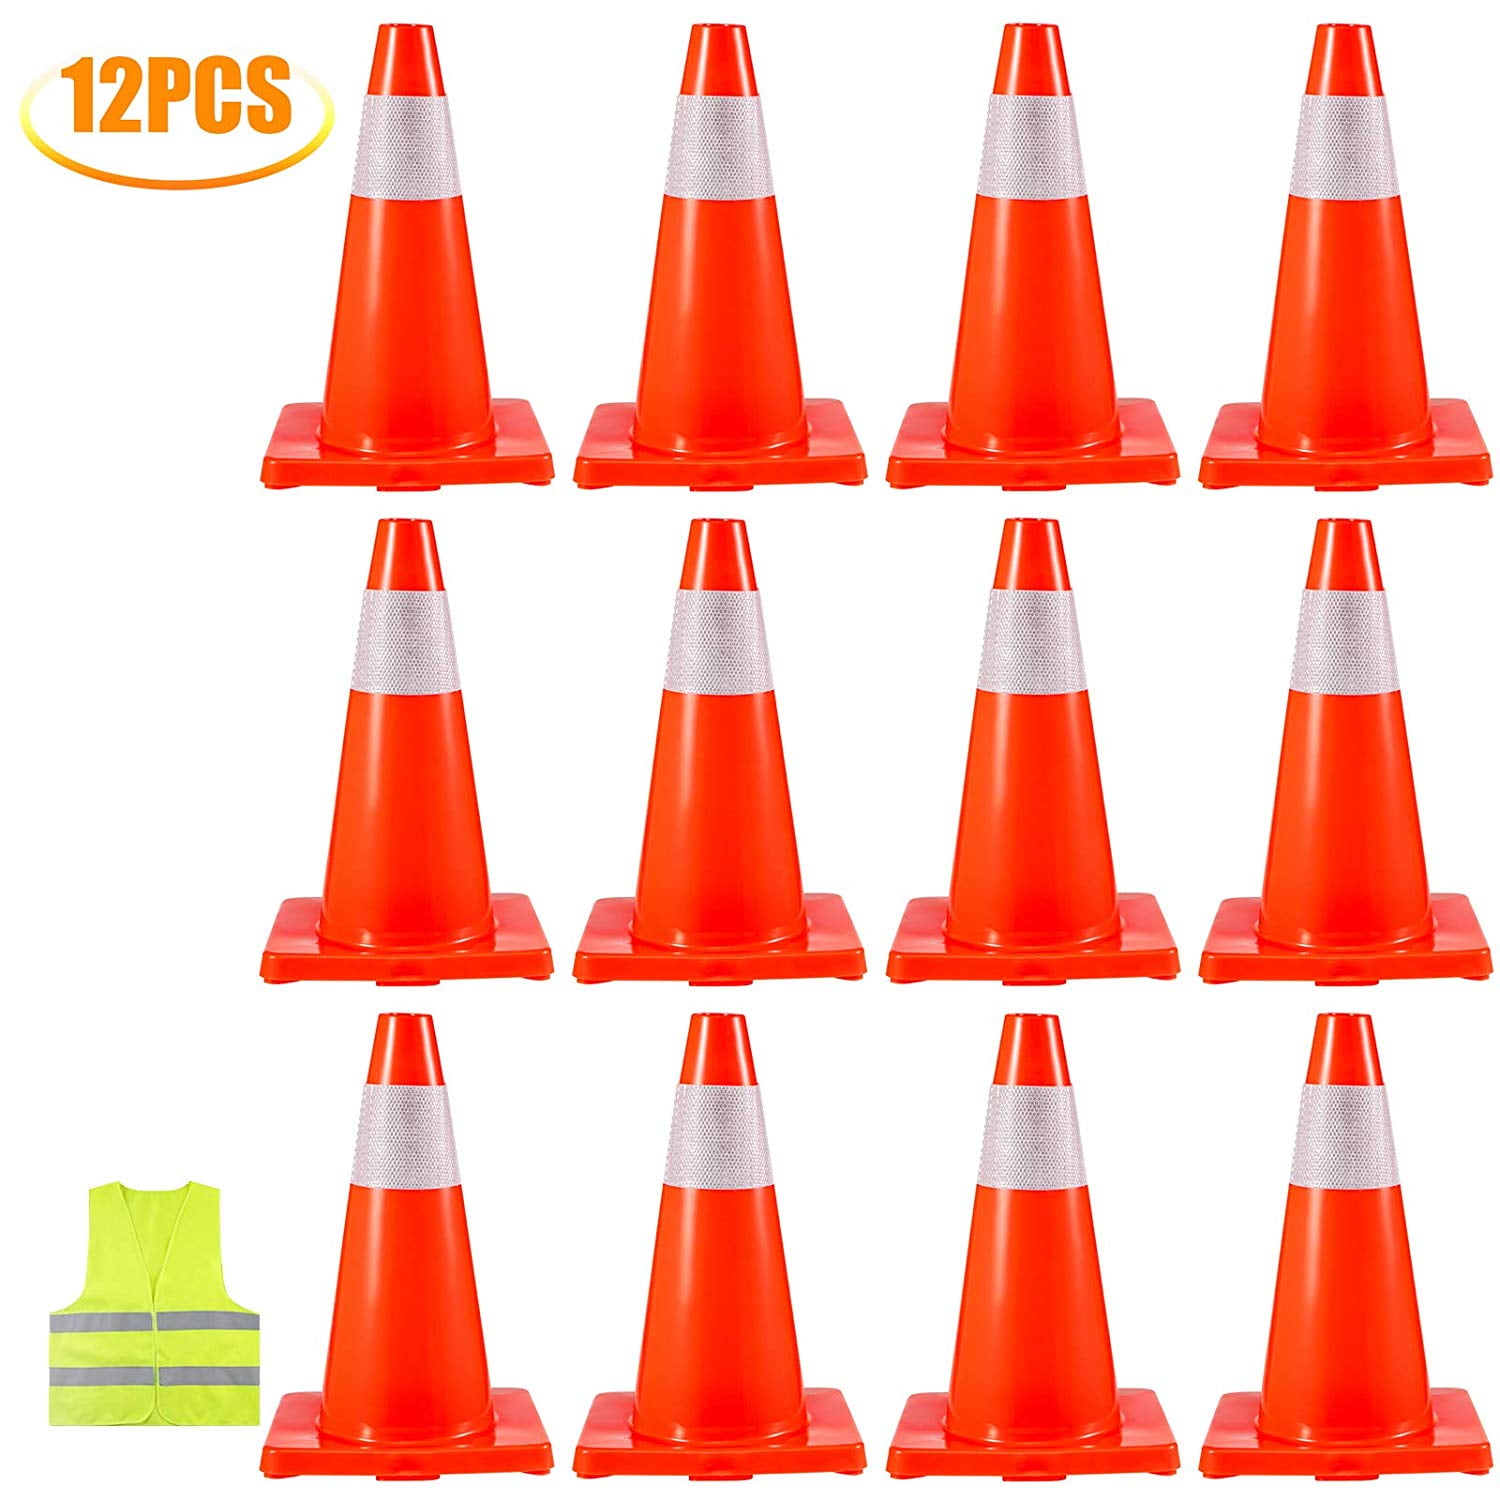 6x 18" Road Safety Cone Construction Emergency Parking PVC Traffic Cones 